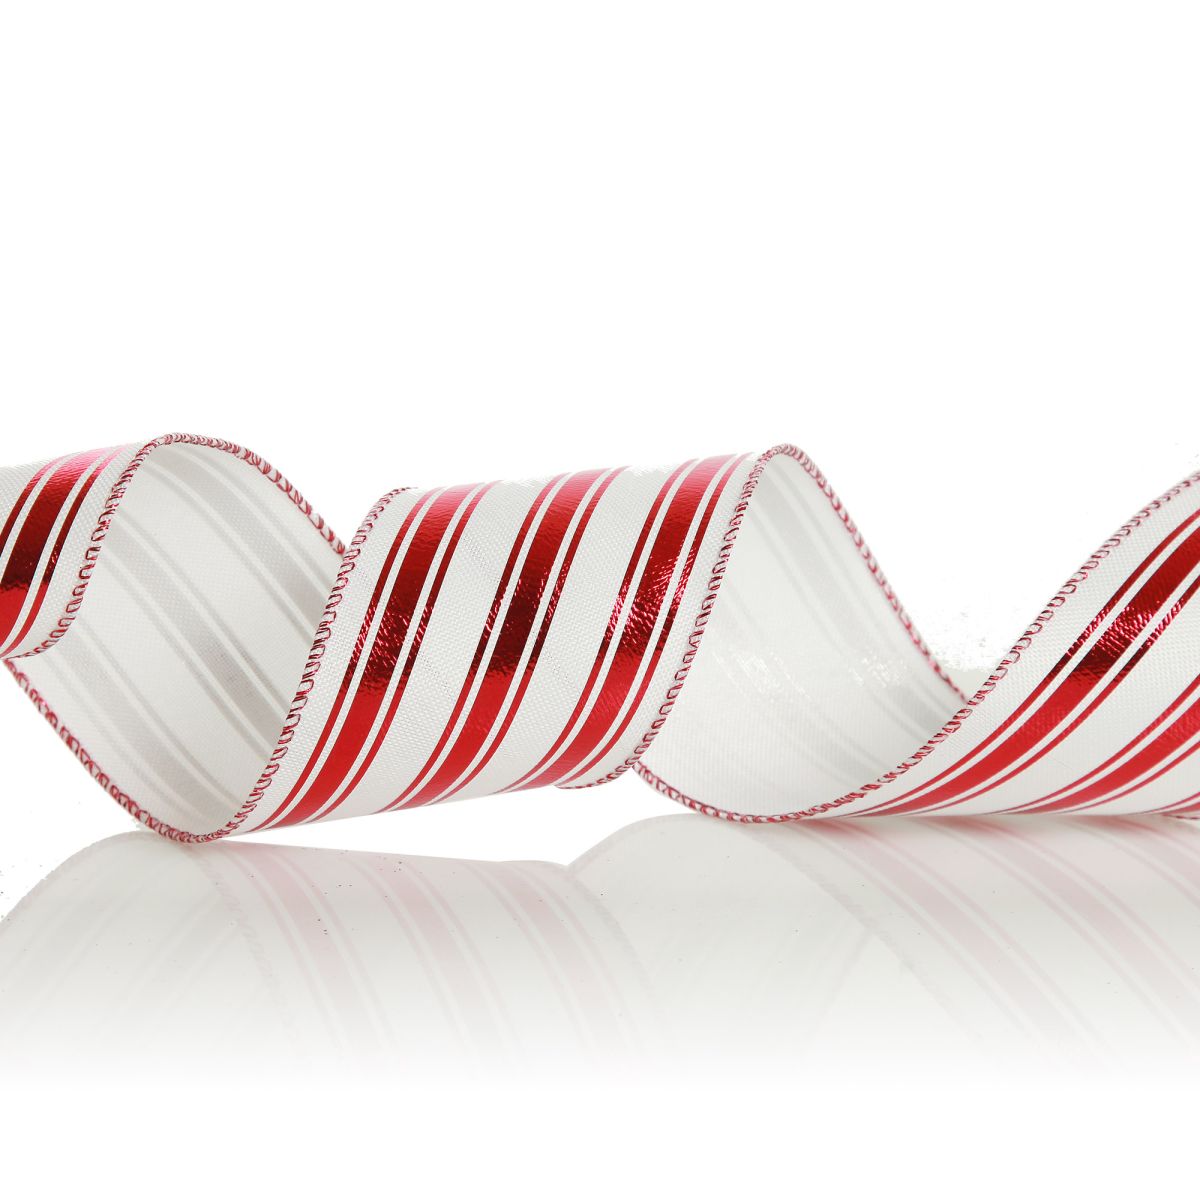 Celebrate It Christmas Wired Ribbon Red & White Striped